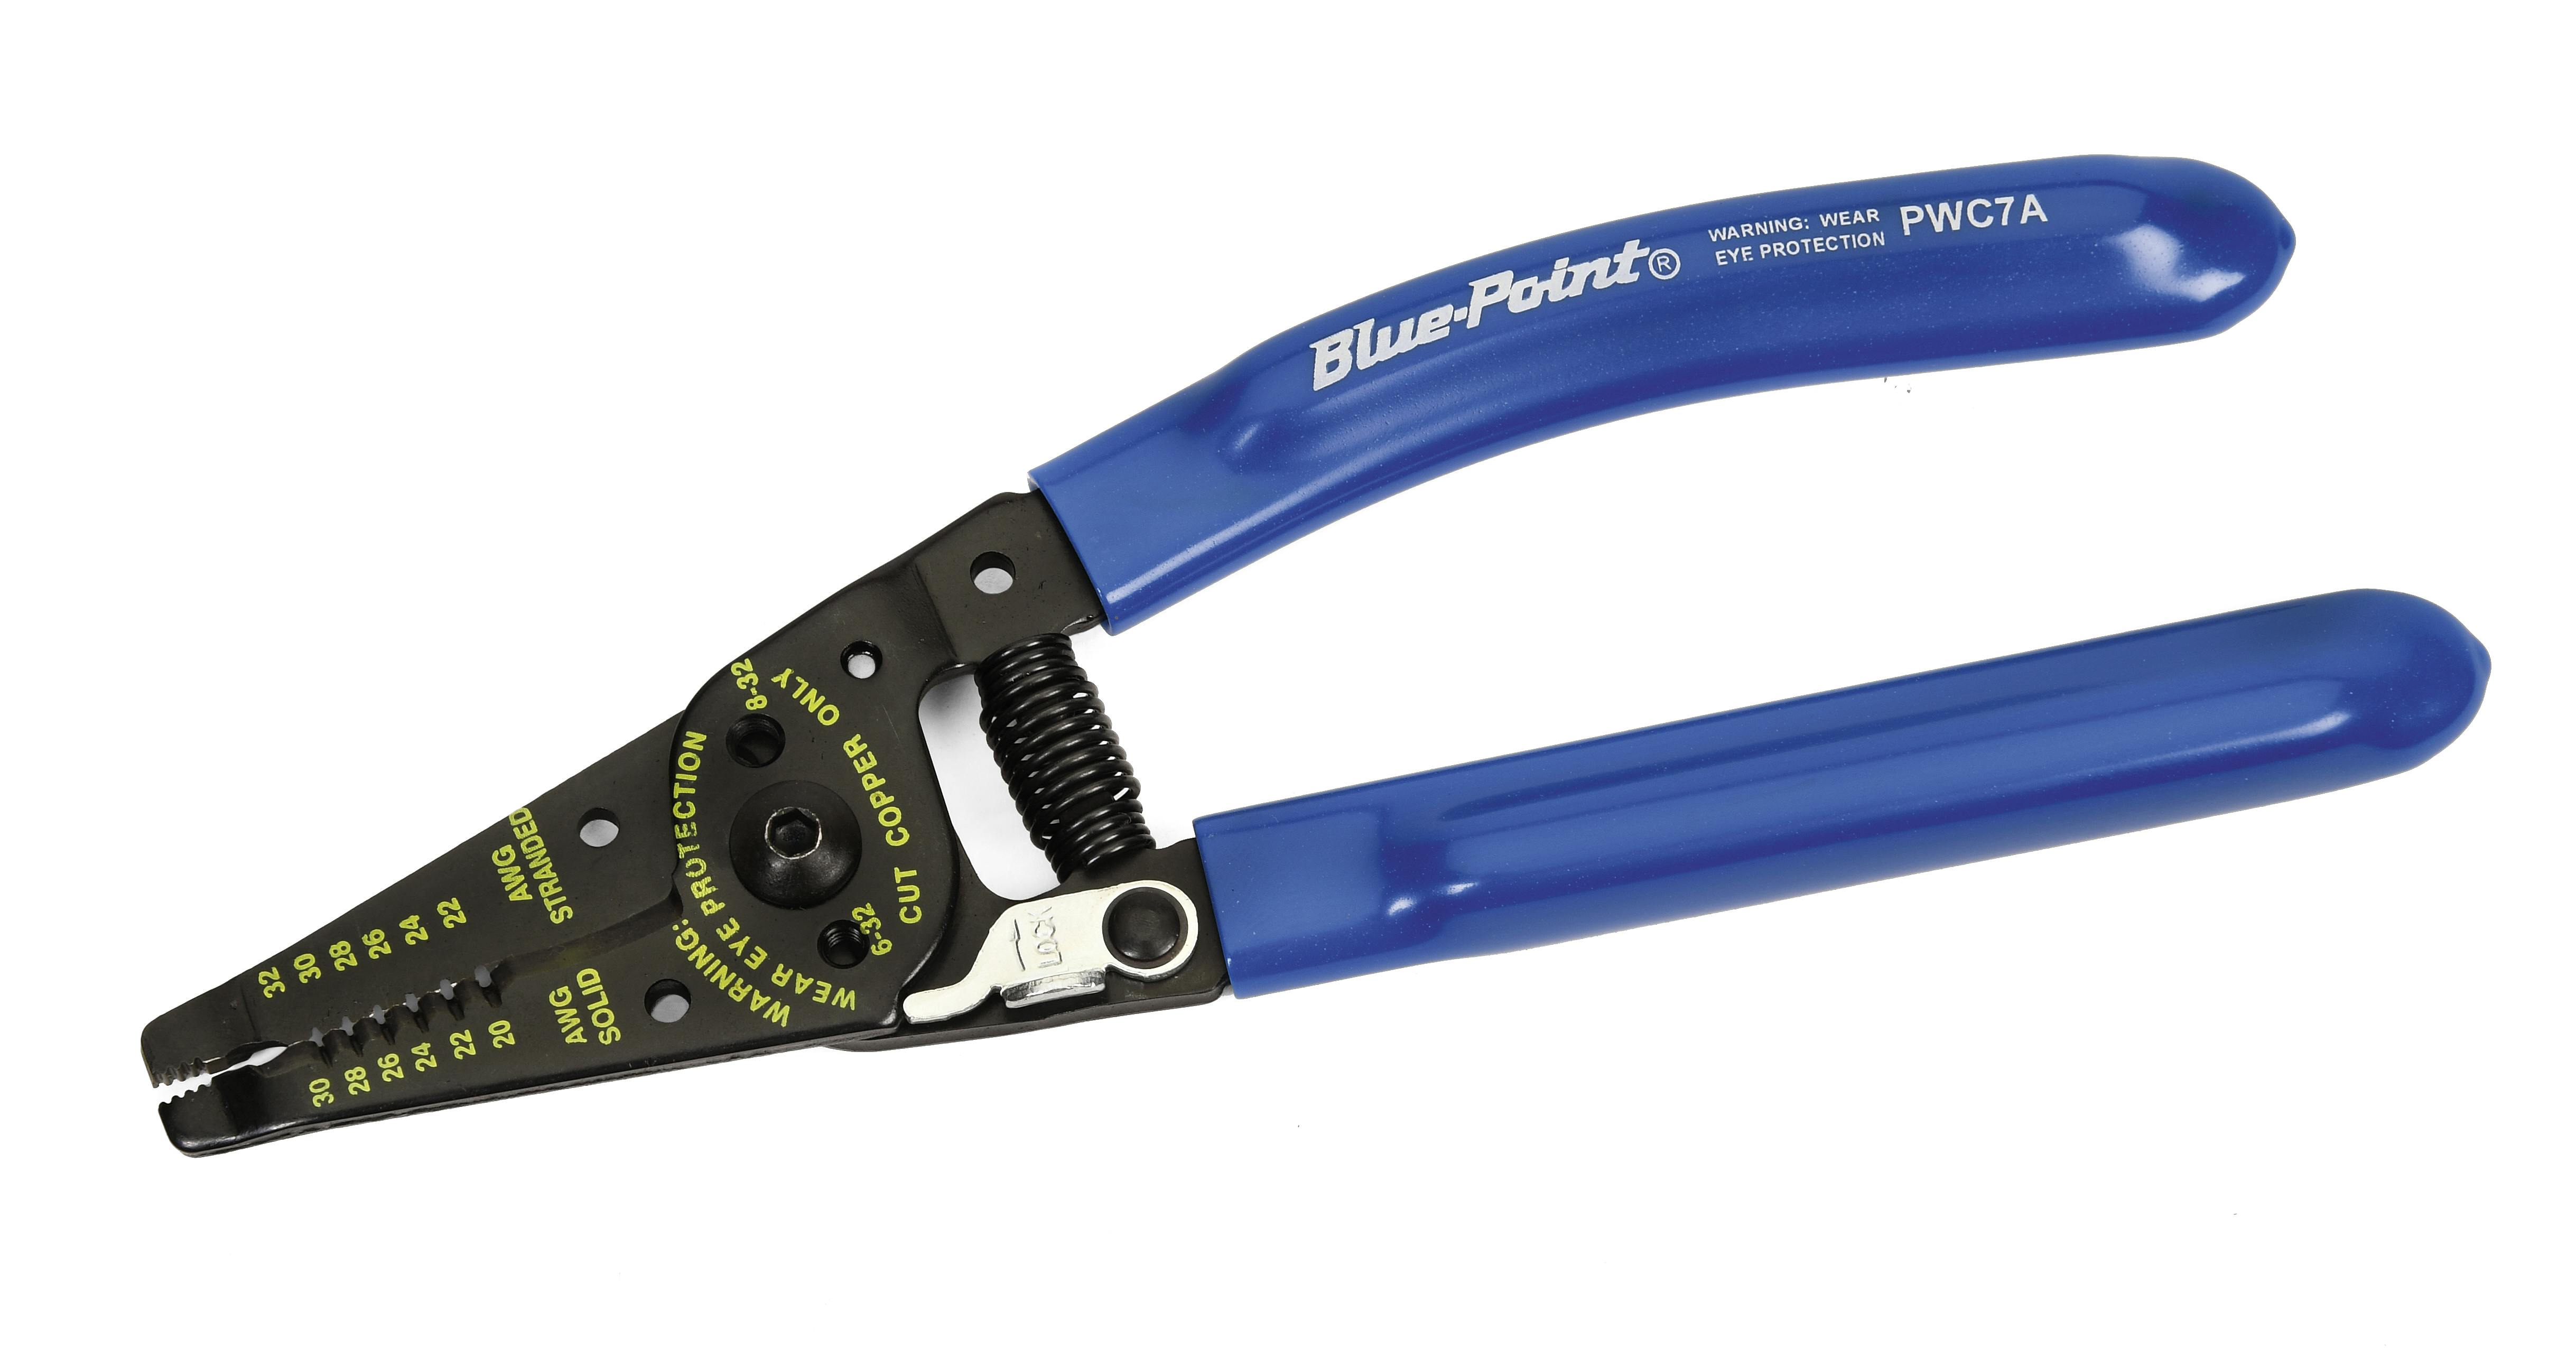 Looking to Buy Blue Point Tools. Get the Best Deals Here